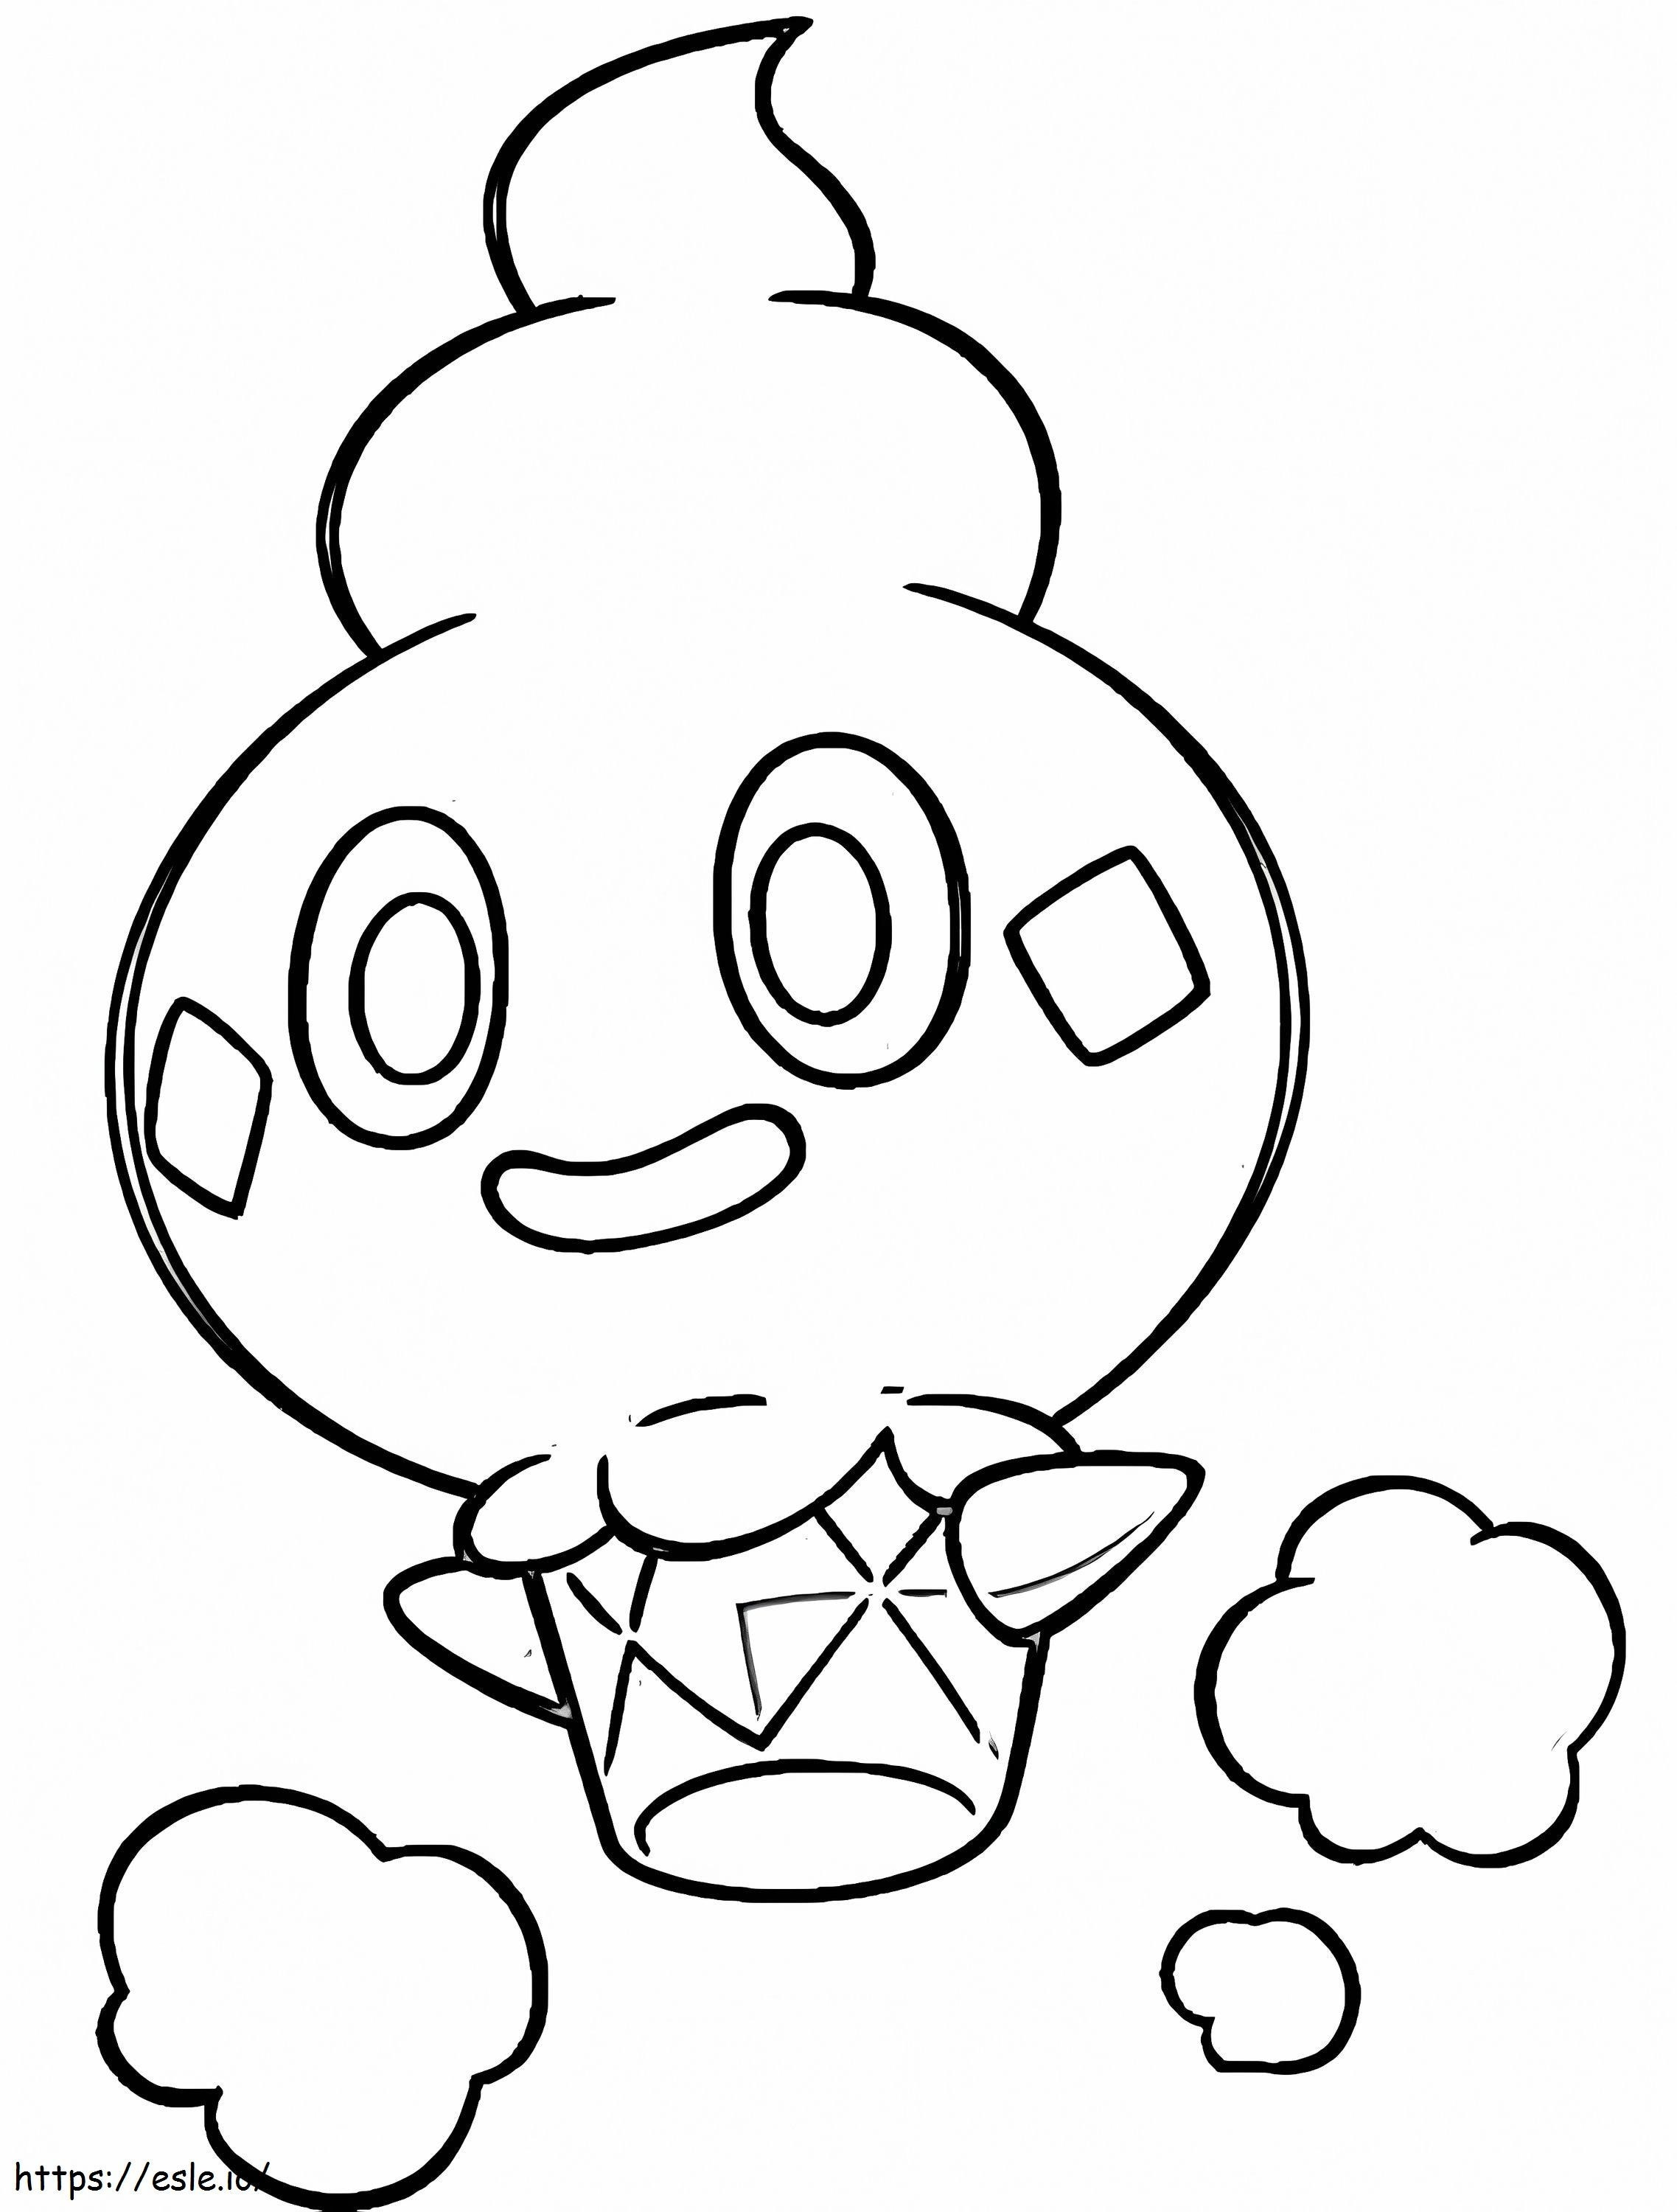 Lovely Vanillite coloring page